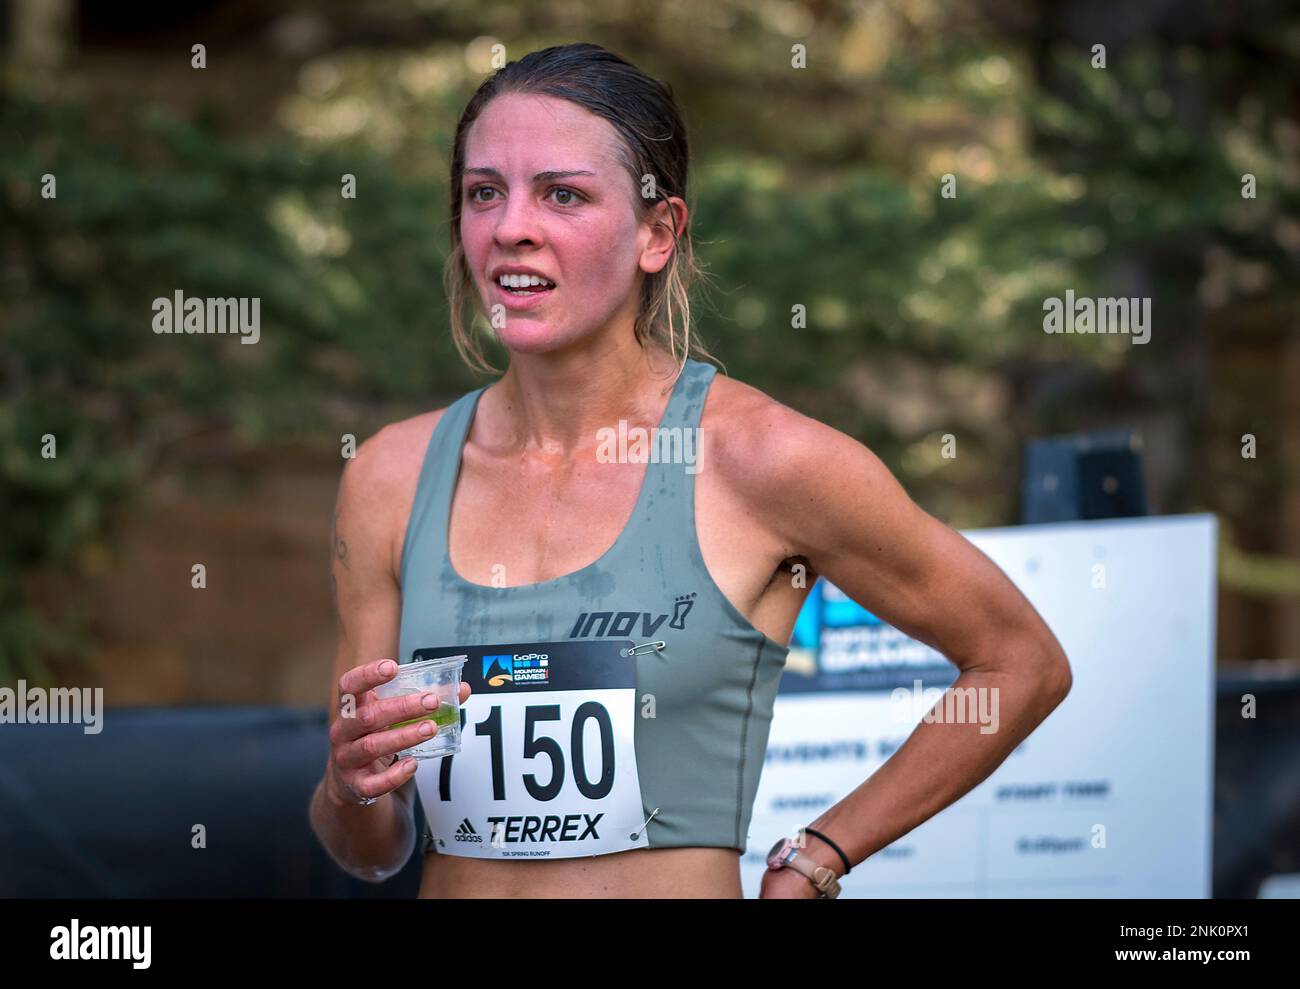 June 12, 2022: Colorado based mountain runner, Janelle Lincks, following  her second place finish in the Adidas TERREX 10K Spring Runoff, during the  GoPro Mountain Games. Celebrating their 20th year and hosted